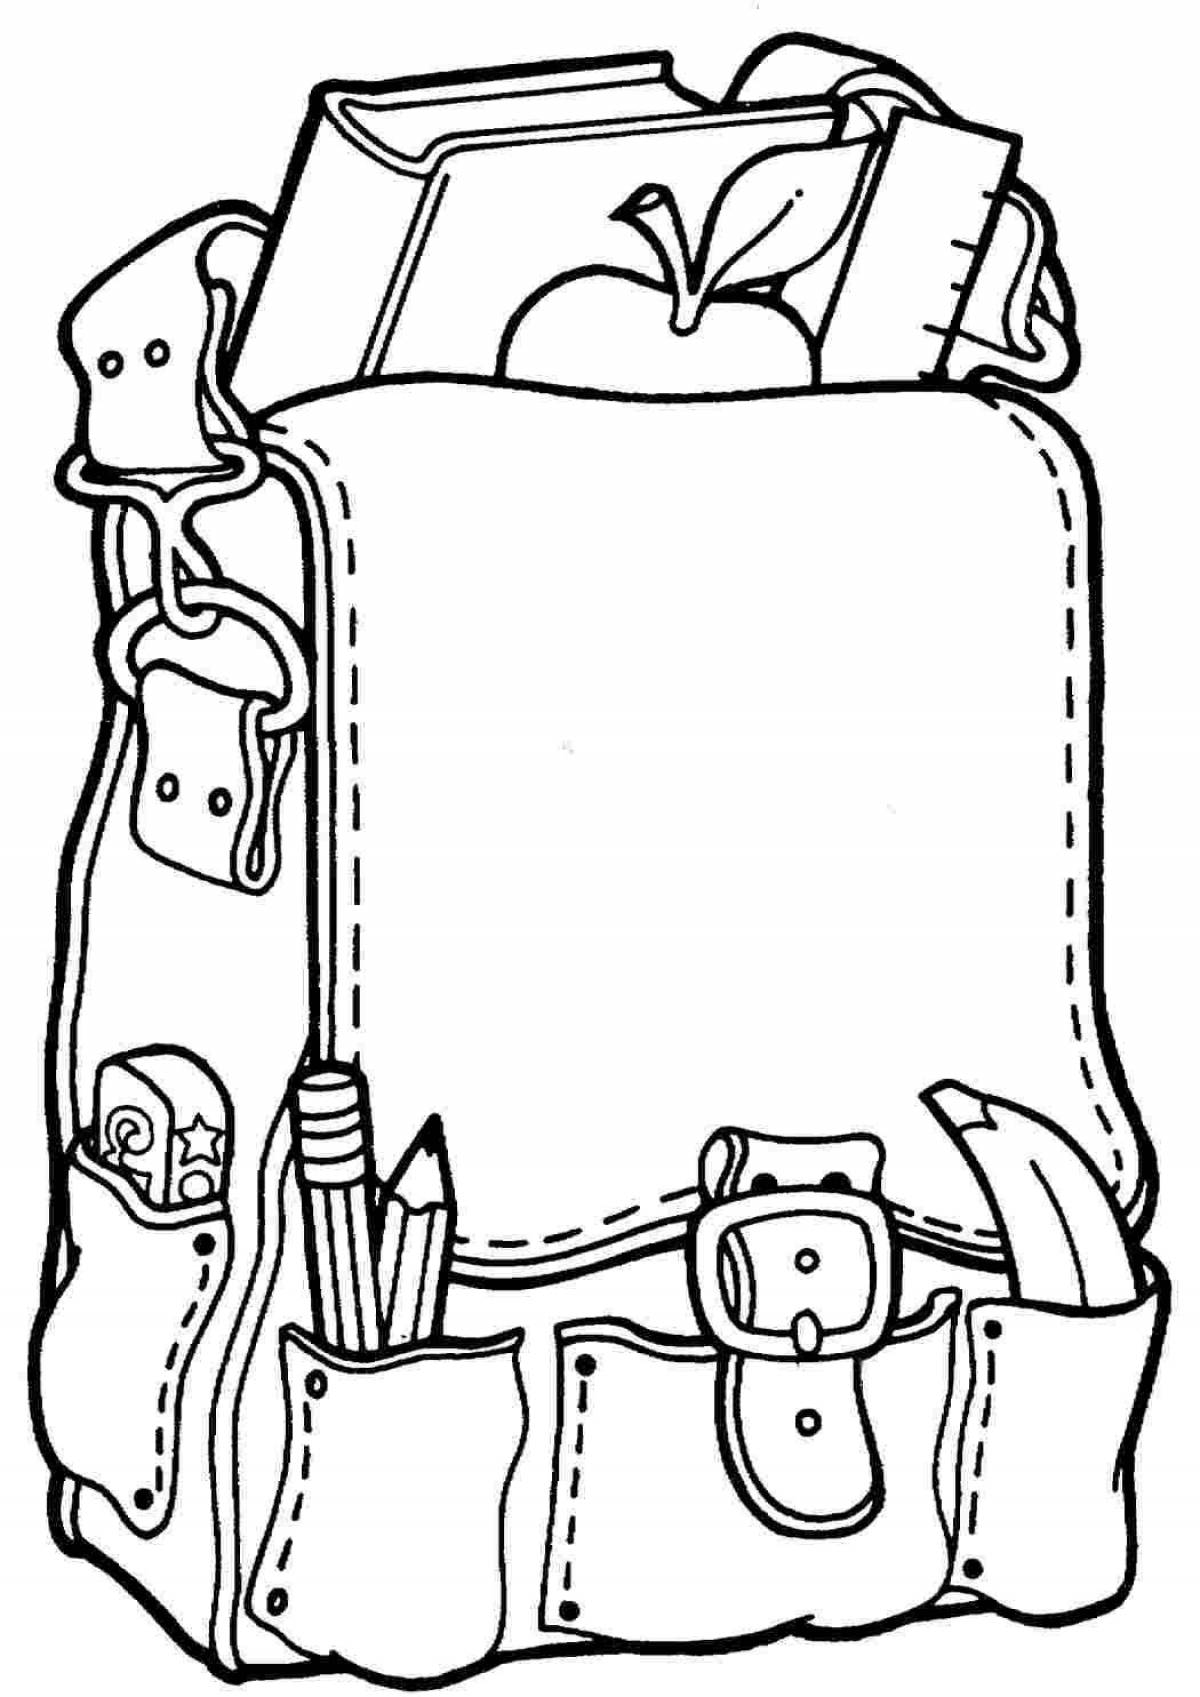 Fabulous backpack coloring page